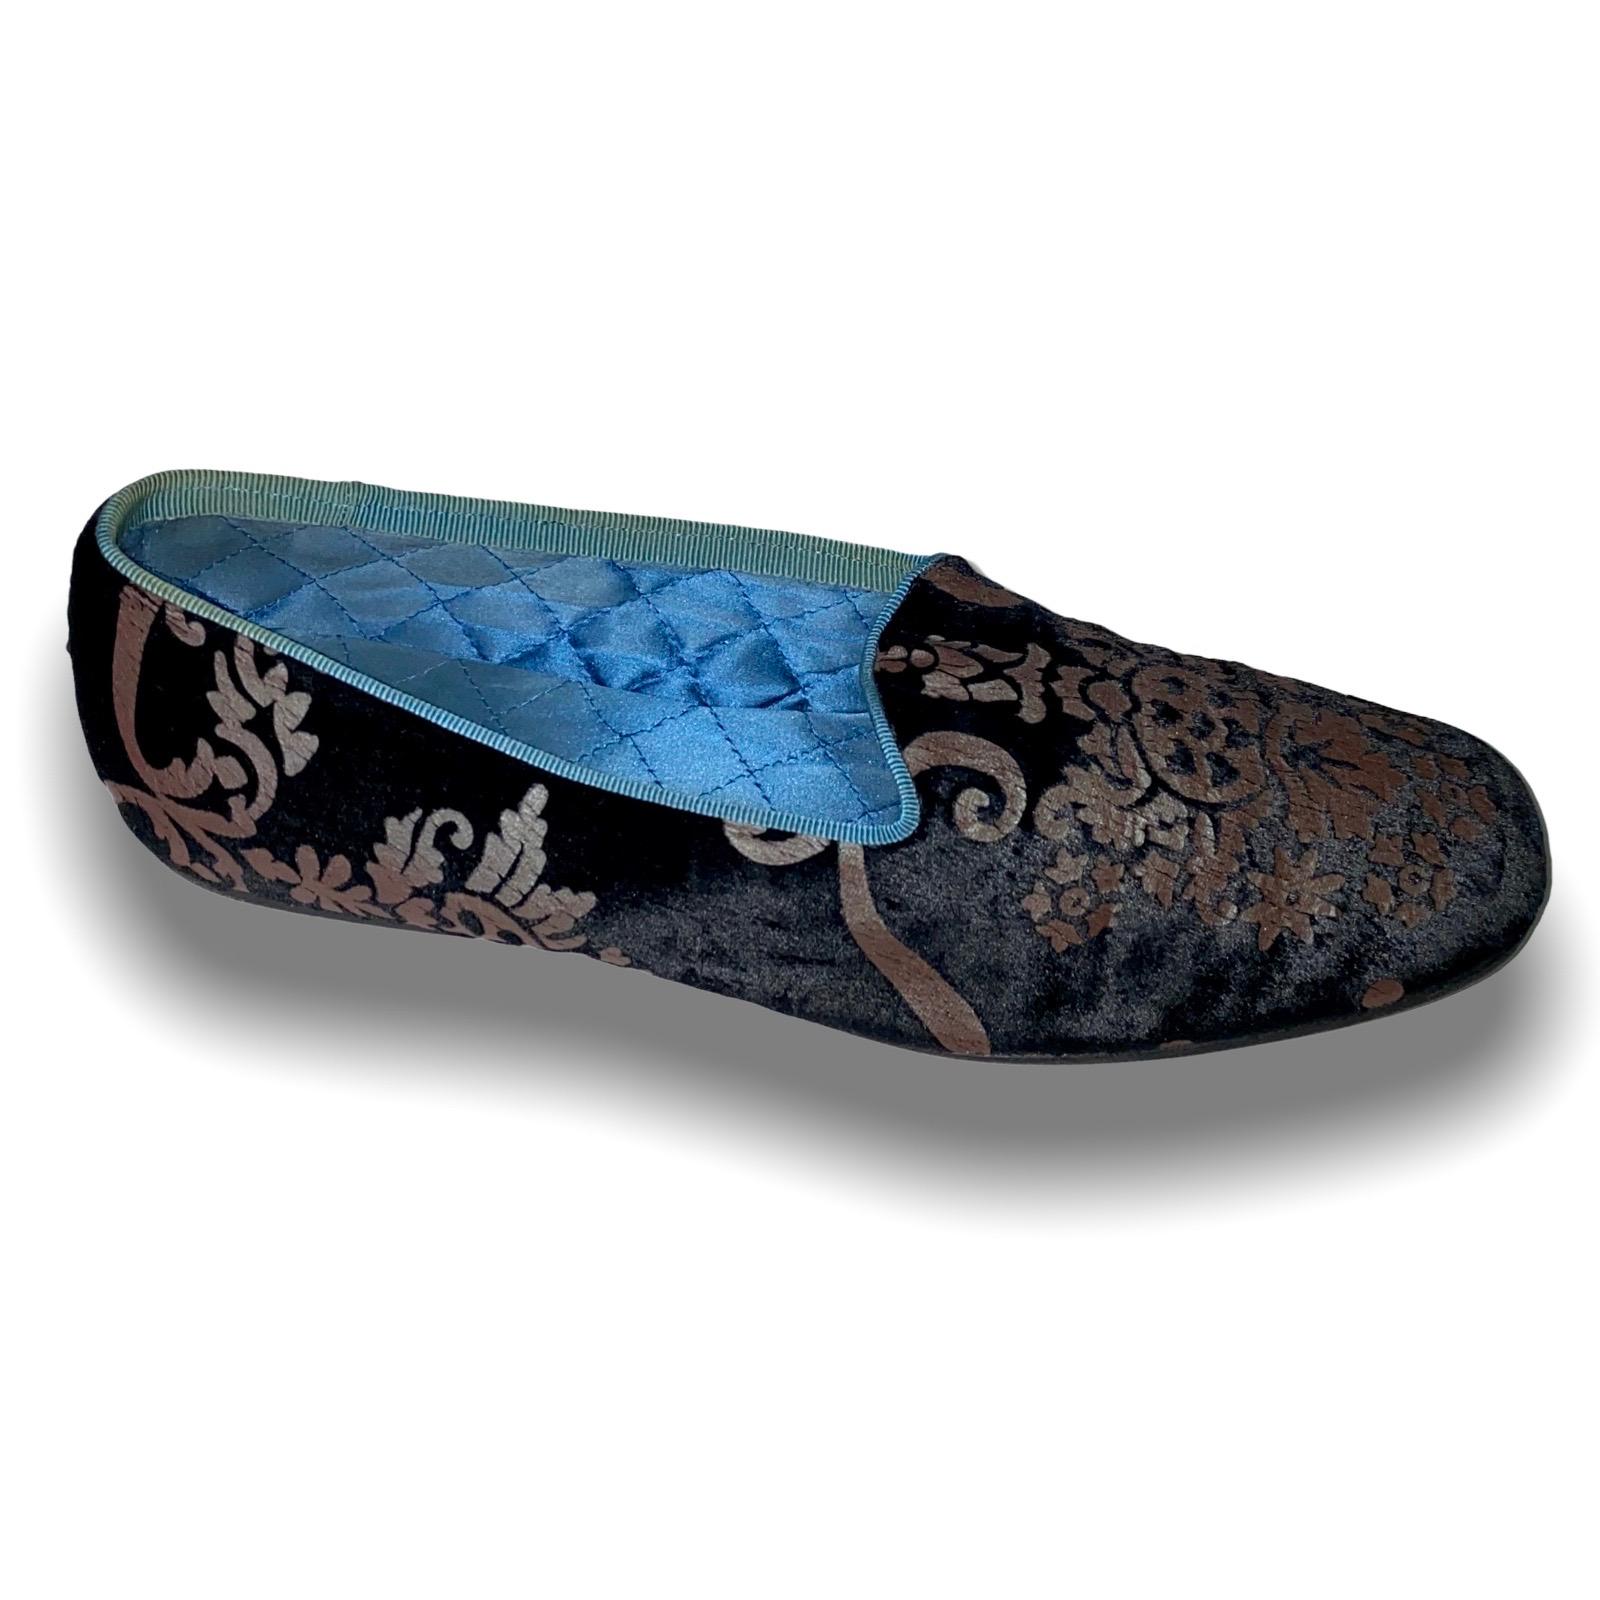 Women's Rare Gucci by Tom Ford Velvet Brocade Print Flats Slippers Loafers 8.5B For Sale